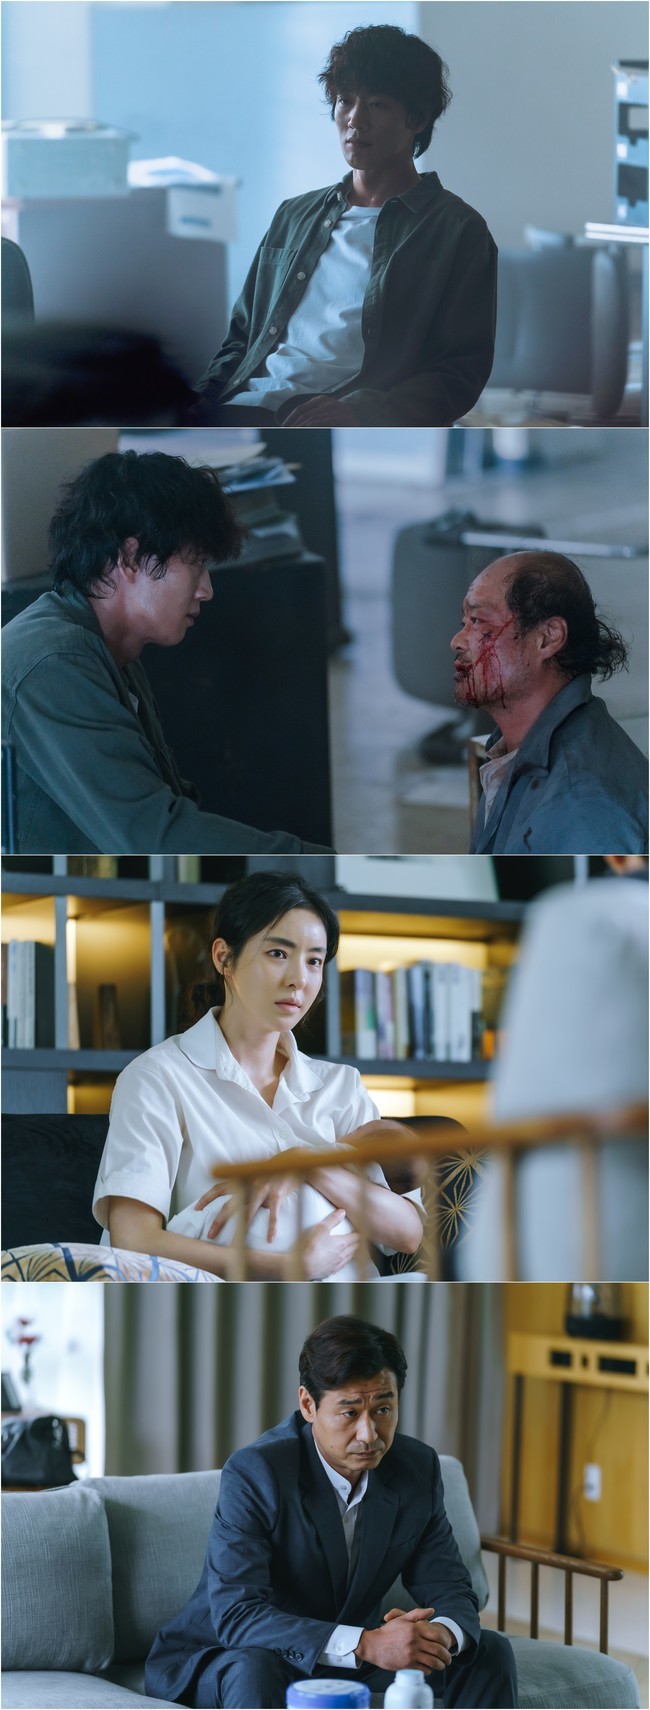 Kim Rae-won launches a counterattack of angerTVNs monthly drama Luka: The Biggining (playplayed by Chun Sung-il/directed by Kim Hong-sun) captured the dark charisma of G.O (Kim Rae-won), who lost Cloud (Lee Da-hee) on March 1.G.Os bloody eyes, which press Choi Jin-hwan (Kim Sang-ho), add tension.Clouds unusual atmosphere facing George (Park Hyeok-kwon) raises questions about their fate.G.O. and Cloud, who became saviors to each other, had babies and developed dreams of ordinary life, but the happiest moment came to a crisis.Cloud and the baby were kidnapped by Ison (Kim Sung-oh), and his dream was shattered. G.O, who had a lonely struggle alone, now has to fight the fate of his family again.His loss and anger, which was difficult to guess, predicted a further storm.G.O., who started counterattacking the boiling anger, is told of his bloody anger in the public photos. G.Os face is cool looking at Choi Jin-hwan, who is covered in blood.Choi Jin-hwan was shocked by the betrayal of Cloud as a spy for Georgie.G.O can find a way to save Cloud through Choi Jin-hwan, and Choi Jin-hwan is curious about what choice to make.Cloud was also spotted facing Georgie: HumanTechs L.U.C.A.Georgie, who has been working on the (Luca) project, has committed numerous evil acts, including using his power to manipulate and conceal events.The monster itself is a terrible selfishness that makes peoples misfortunes and lives funny for their ambitions. He was at odds with Hwang Jeong-ah (Jin-kyung), and he was pushed to the edge of the cliff.The encounter between George and Cloud, who is tired of repeated crises, itself heightens the sense of crisis: Clouds eyes, as if to protect the baby, are full of vigilance.Clouds face is hardened by Georges words, heralding an extraordinary change.George, who had been struggling to catch G.O, is focused on what the real purpose of kidnapping Cloud and the baby will be, and how the fate of G.O and Cloud, which were swept by the division of Human Tech, will flow.In the ninth episode, G.O.s gruesome counterattack against the great evils to protect the family unfolds: Humantech Billons notice the presence of a baby with G.O.s genes and reach out to greed.Georgie, Ryu Jung-kwon (guided), and Hwang Jung-ah as well as the newly appeared chief Chung (Jung Eun-chae) are expected to be imprisoned for G.O regardless of means and methods.